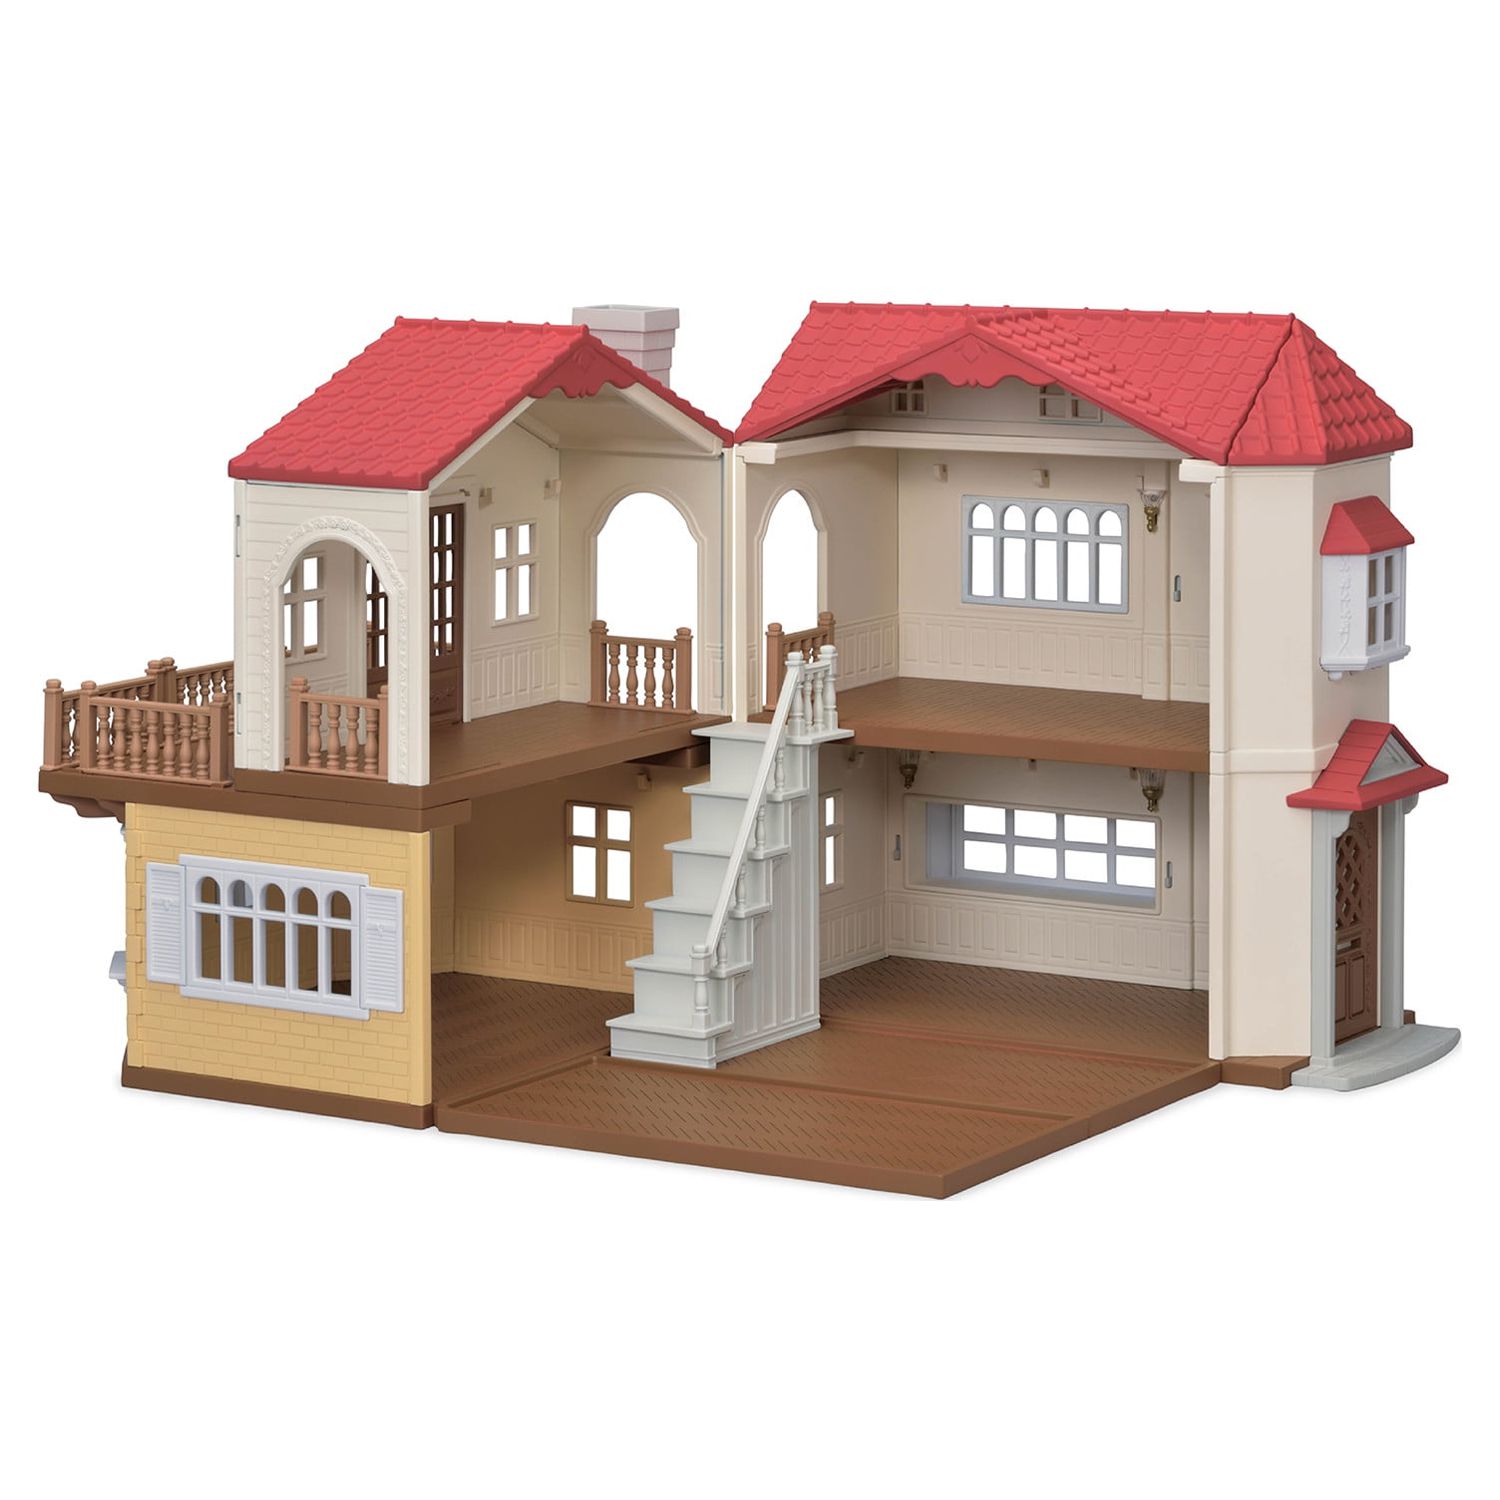 Calico Critters Red Roof Country Home, Dollhouse Playset - image 1 of 5